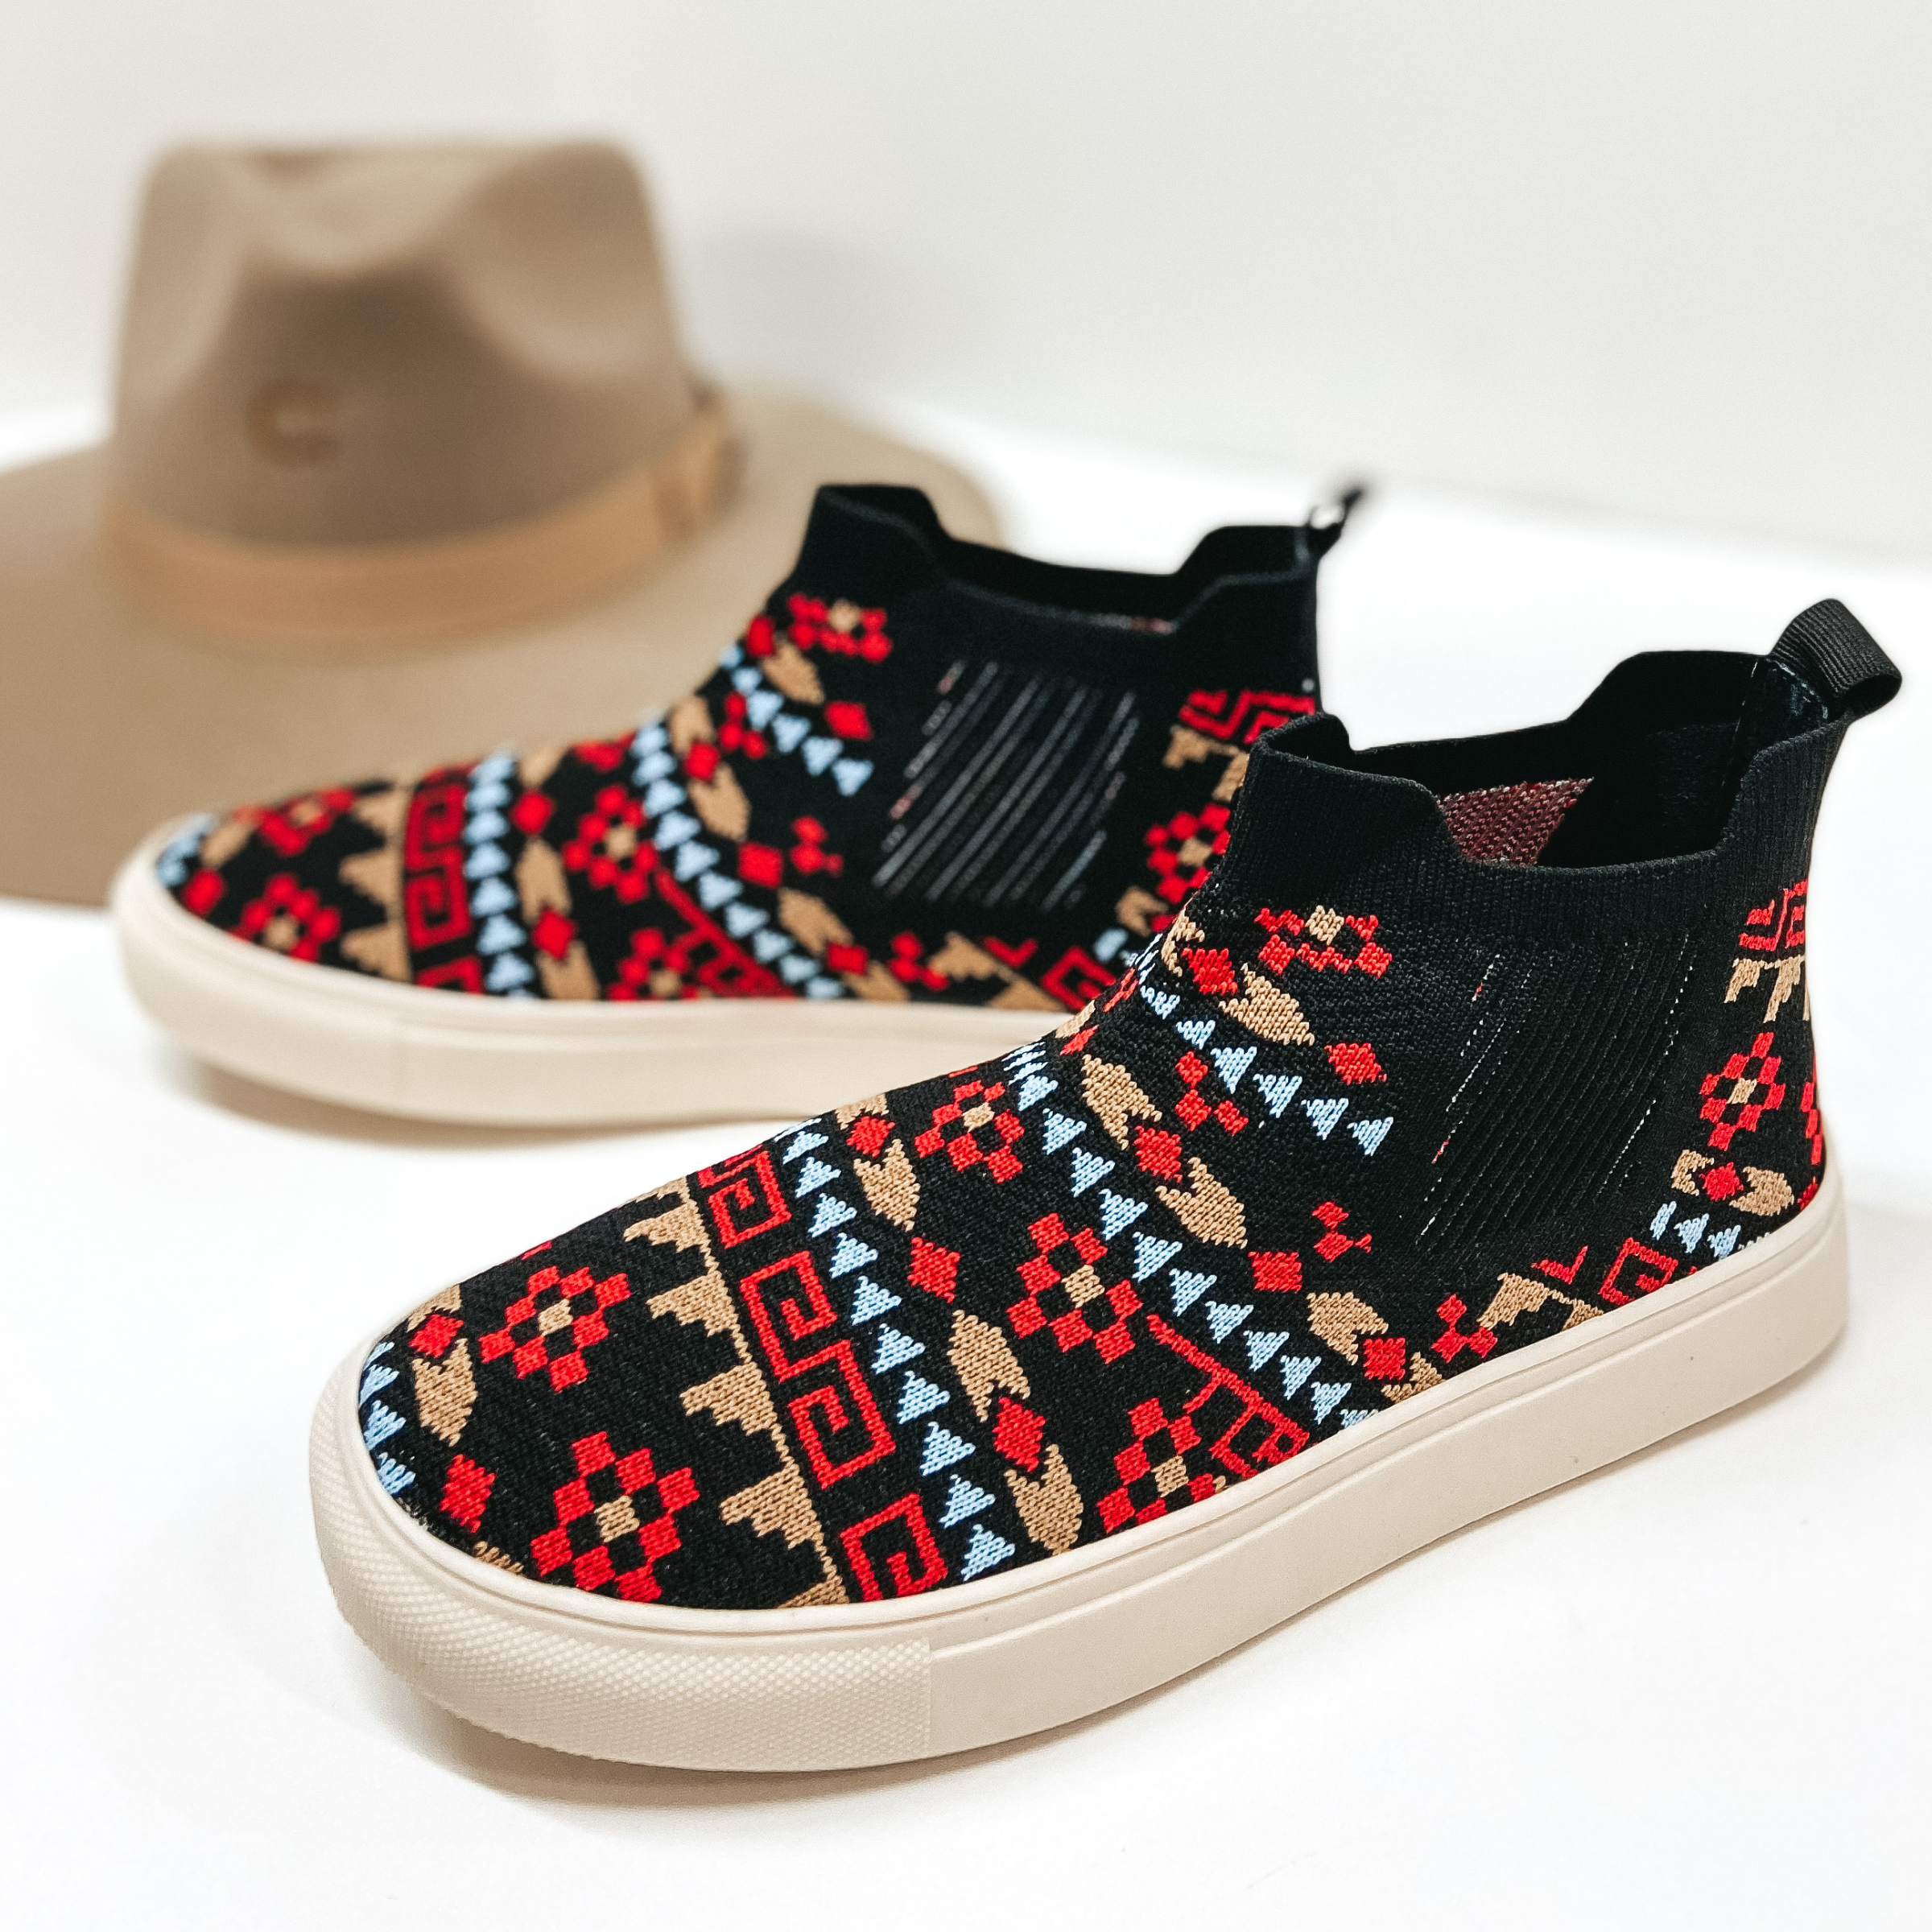 Black knit high top sneakers with red, blue, and taupe tribal designs. Pictured on white background with tan hat.